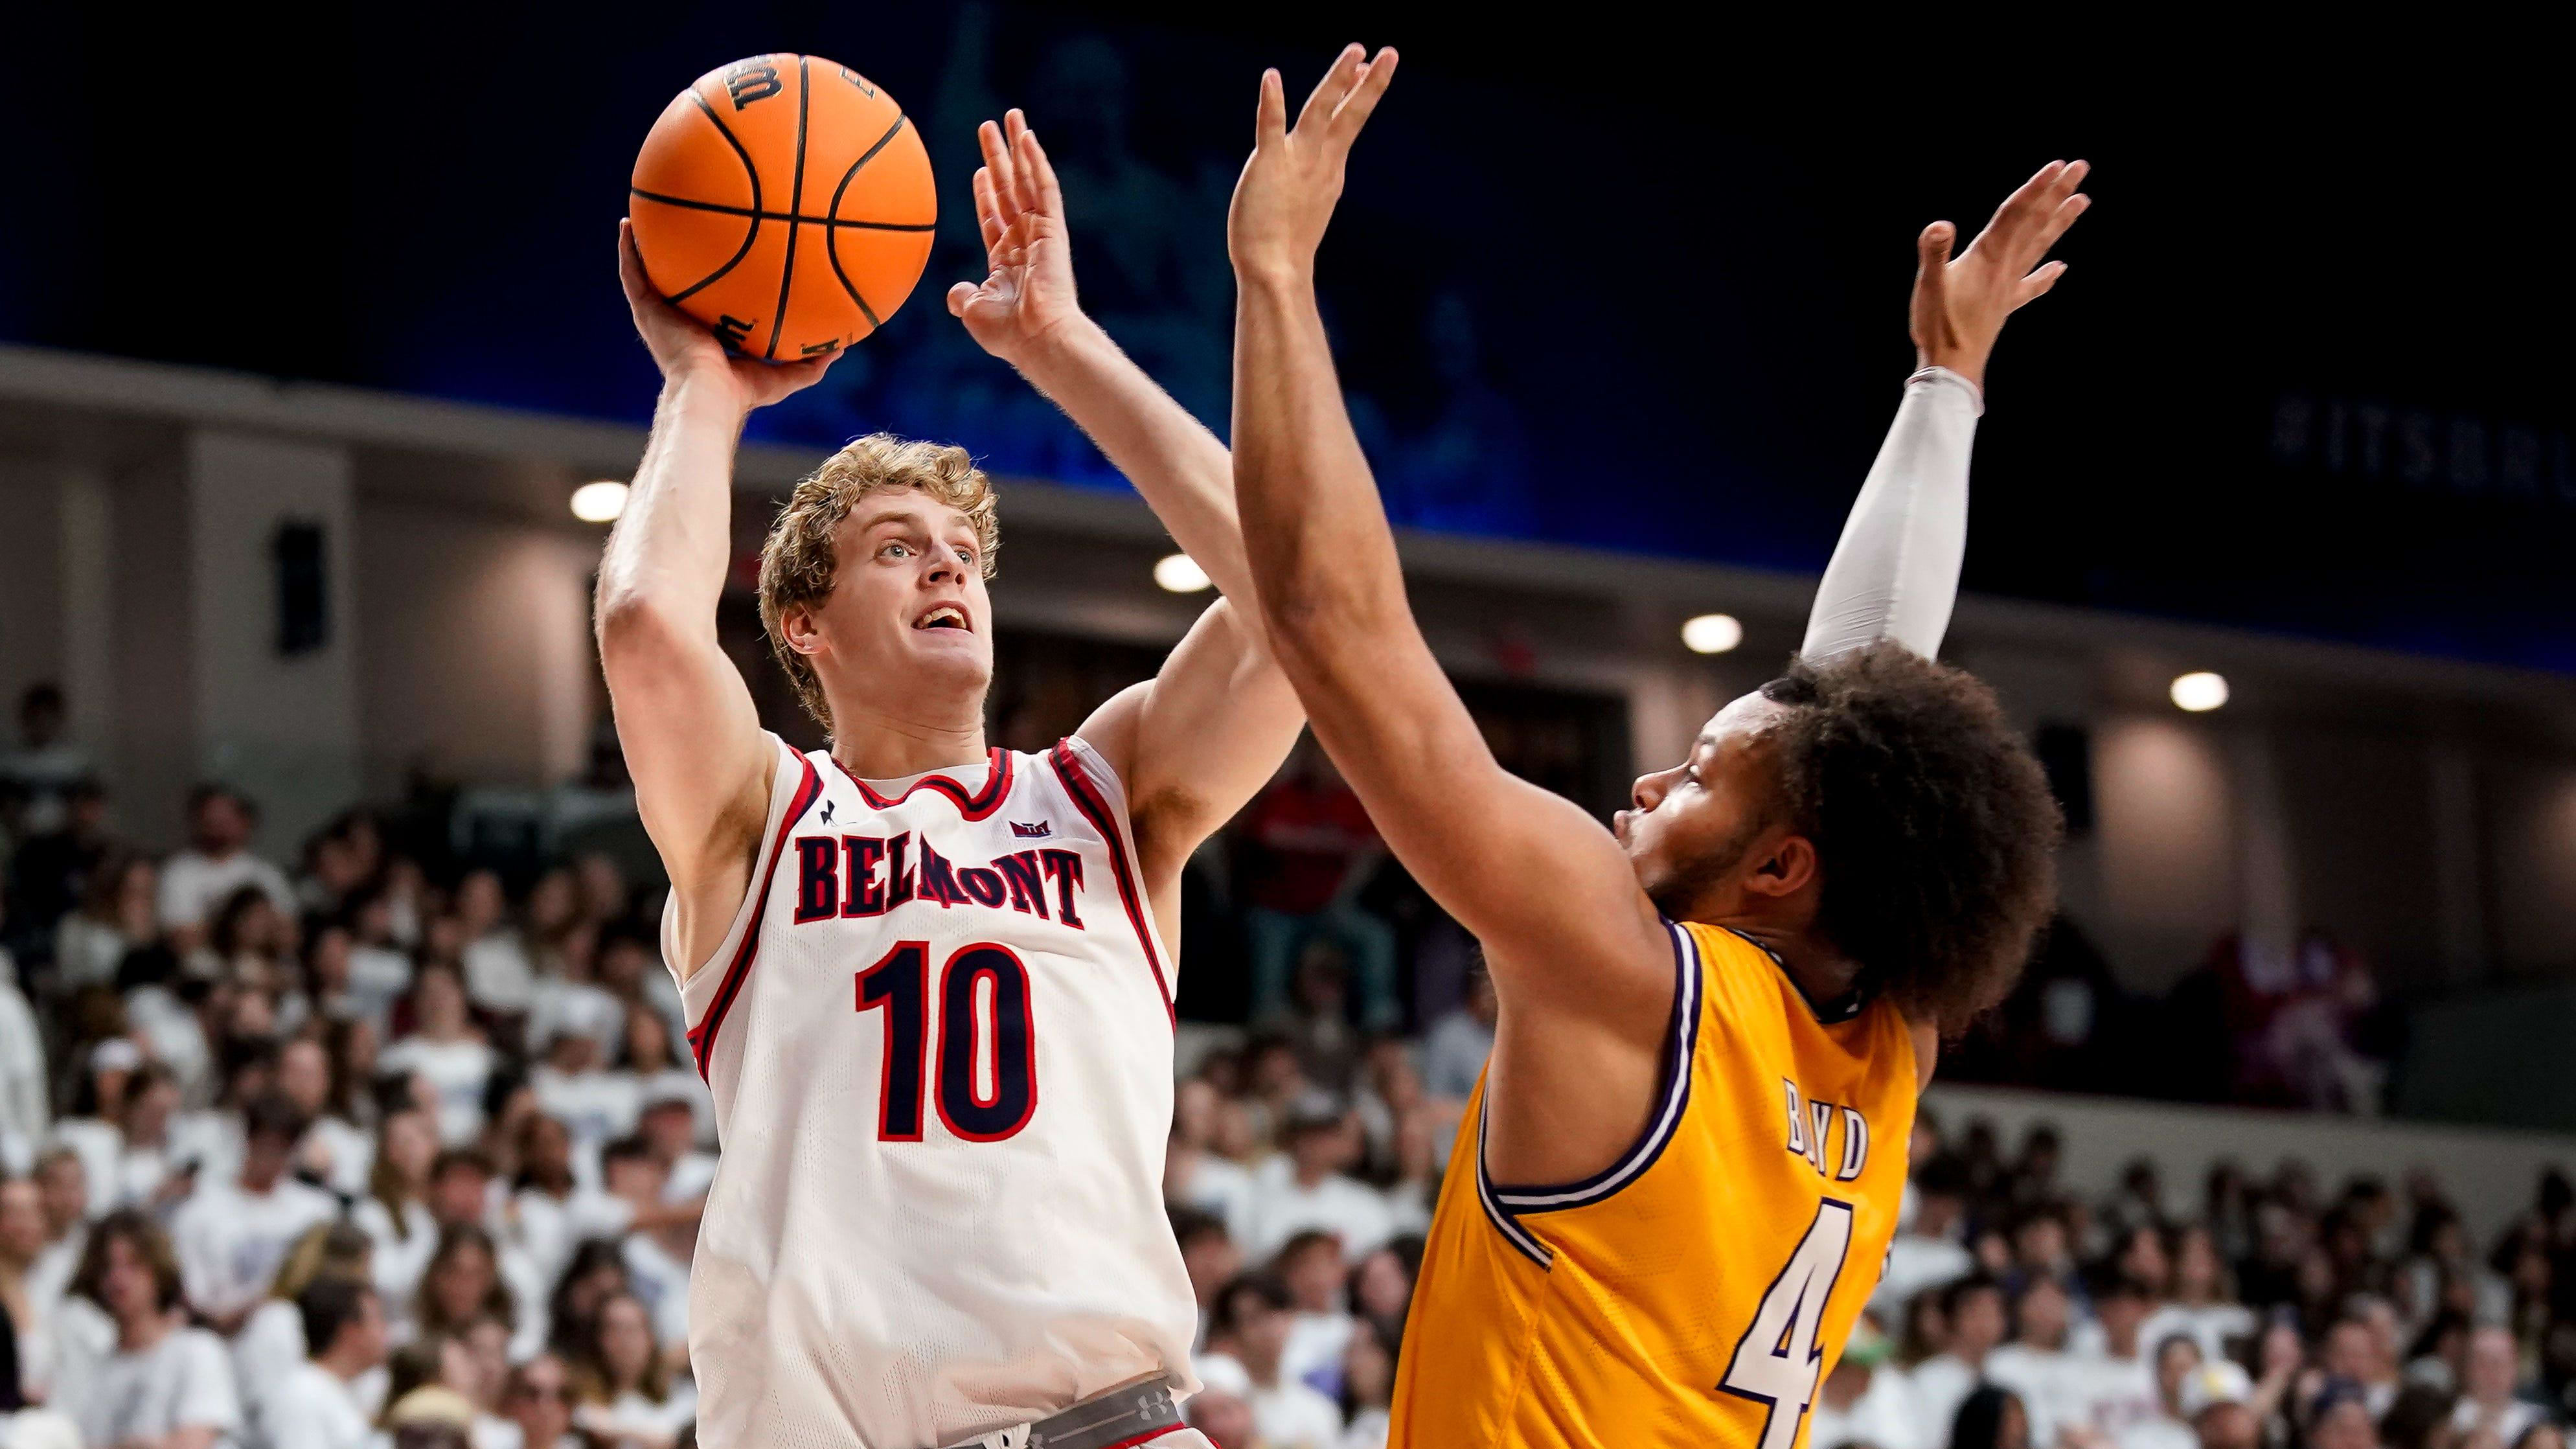 Belmont guard Cade Tyson (10) shoots over Lipscomb guard Derrin Boyd (4) during the second half at